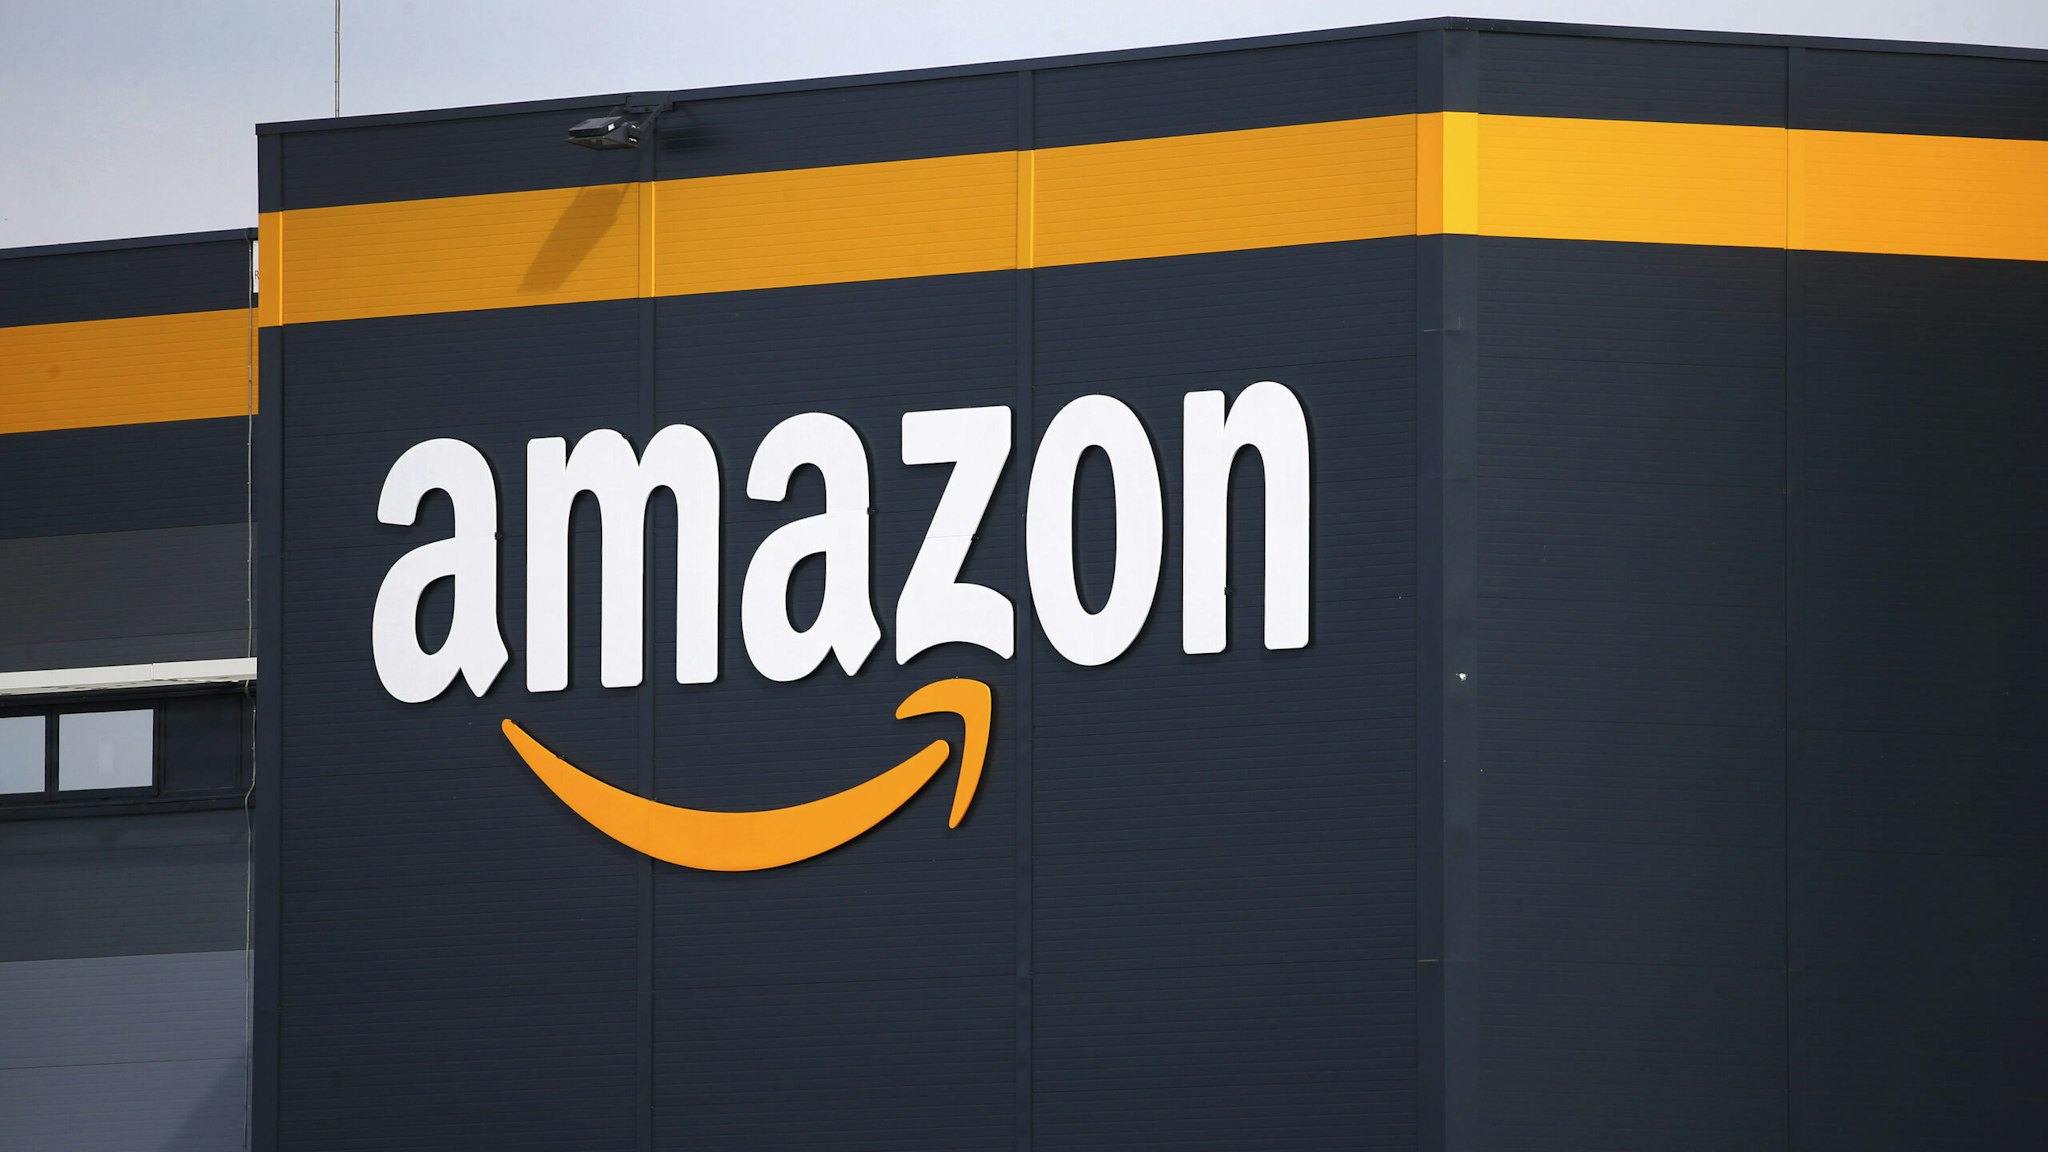 The logo of Amazon is seen on the facade of the company logistics center on April 21, 2020 in Bretigny-sur-Orge, France. The French government has ordered the American e-commerce giant Amazon to take measures at four of its sites in France to better protect employees against Covid-19. This Tuesday, the Versailles Court of Appeal examined the appeal filed by Amazon against a decision requiring it to restrict its activity in France during this period of confinement. Amazon Logistique France has finally decided to close all of its warehouses pending the decision of the Versailles Court of Appeal, which will be made on Friday April 24.